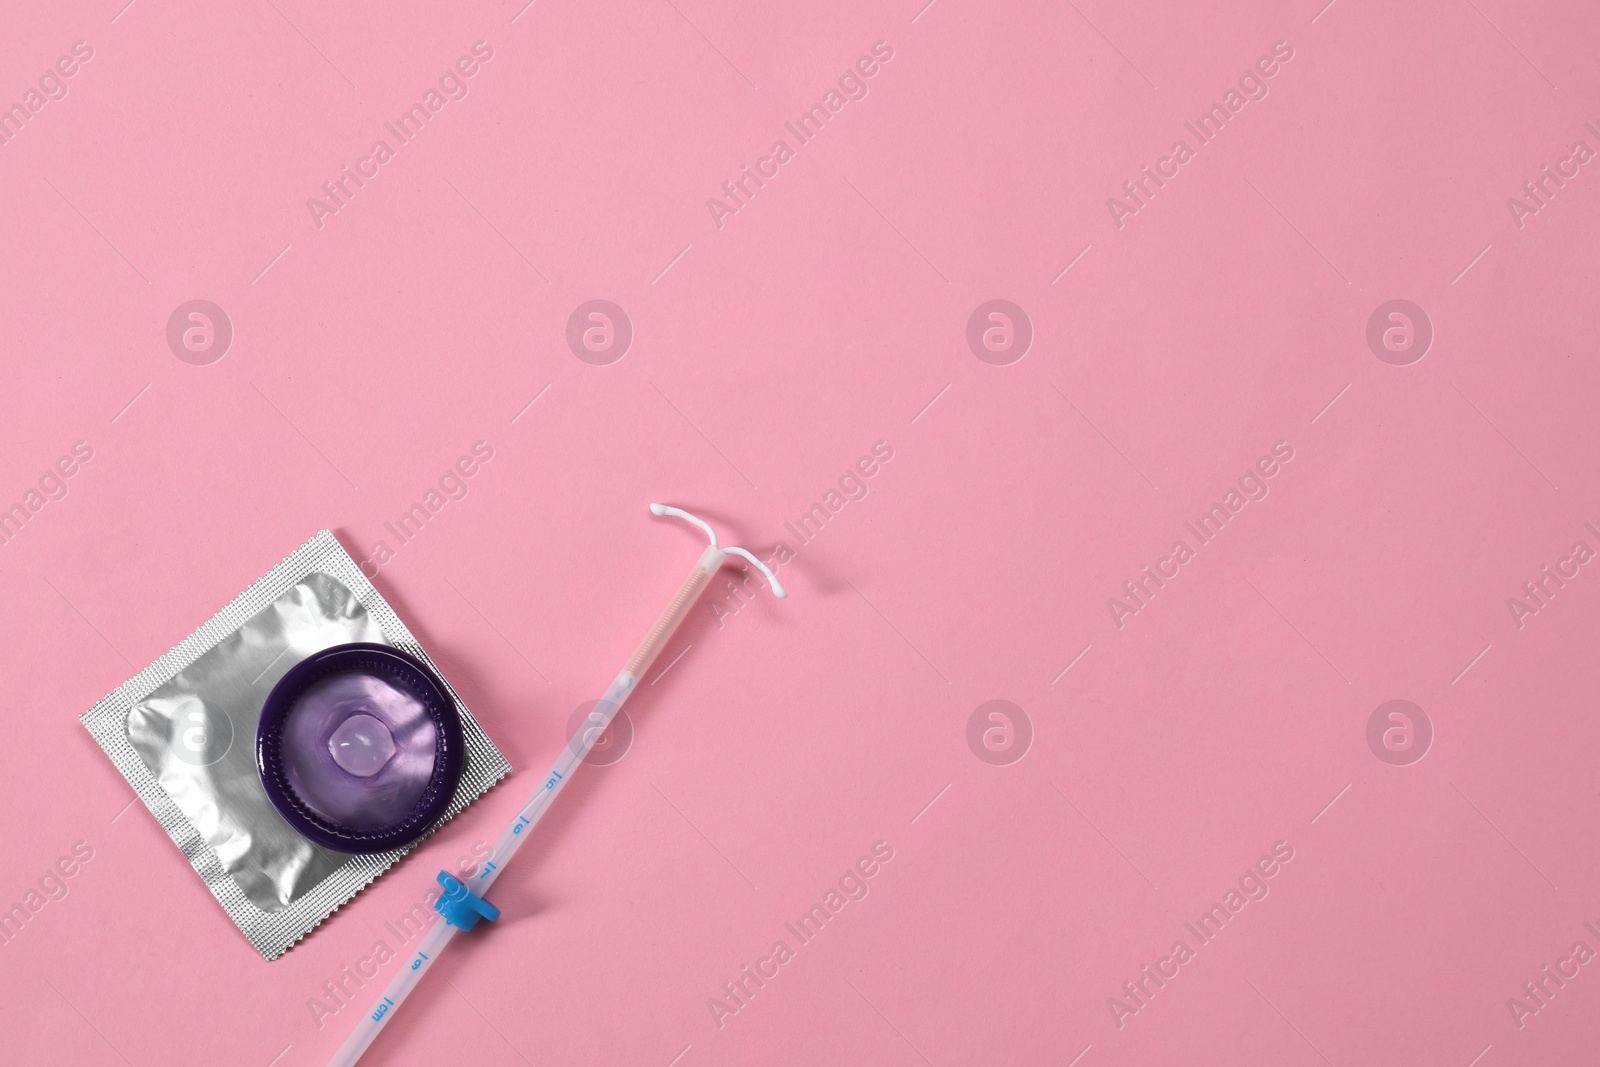 Photo of Contraception choice. Condoms and intrauterine device on pink background, flat lay. Space for text